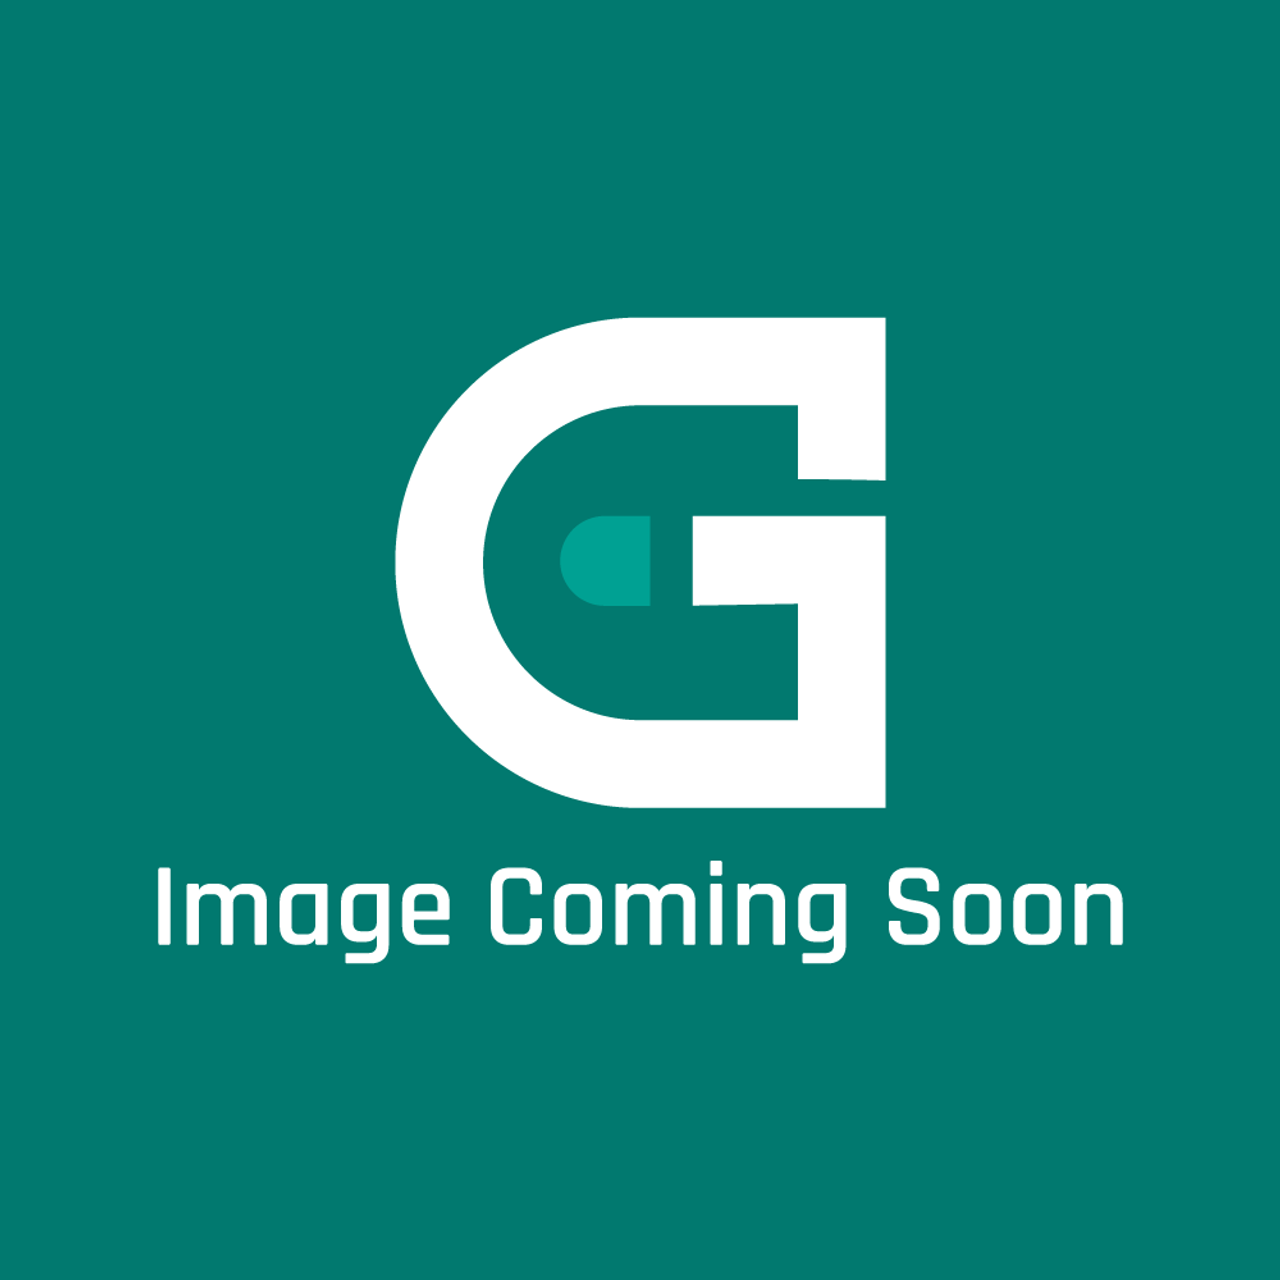 Frigidaire - Electrolux 5304495010 Handle - Image Coming Soon!